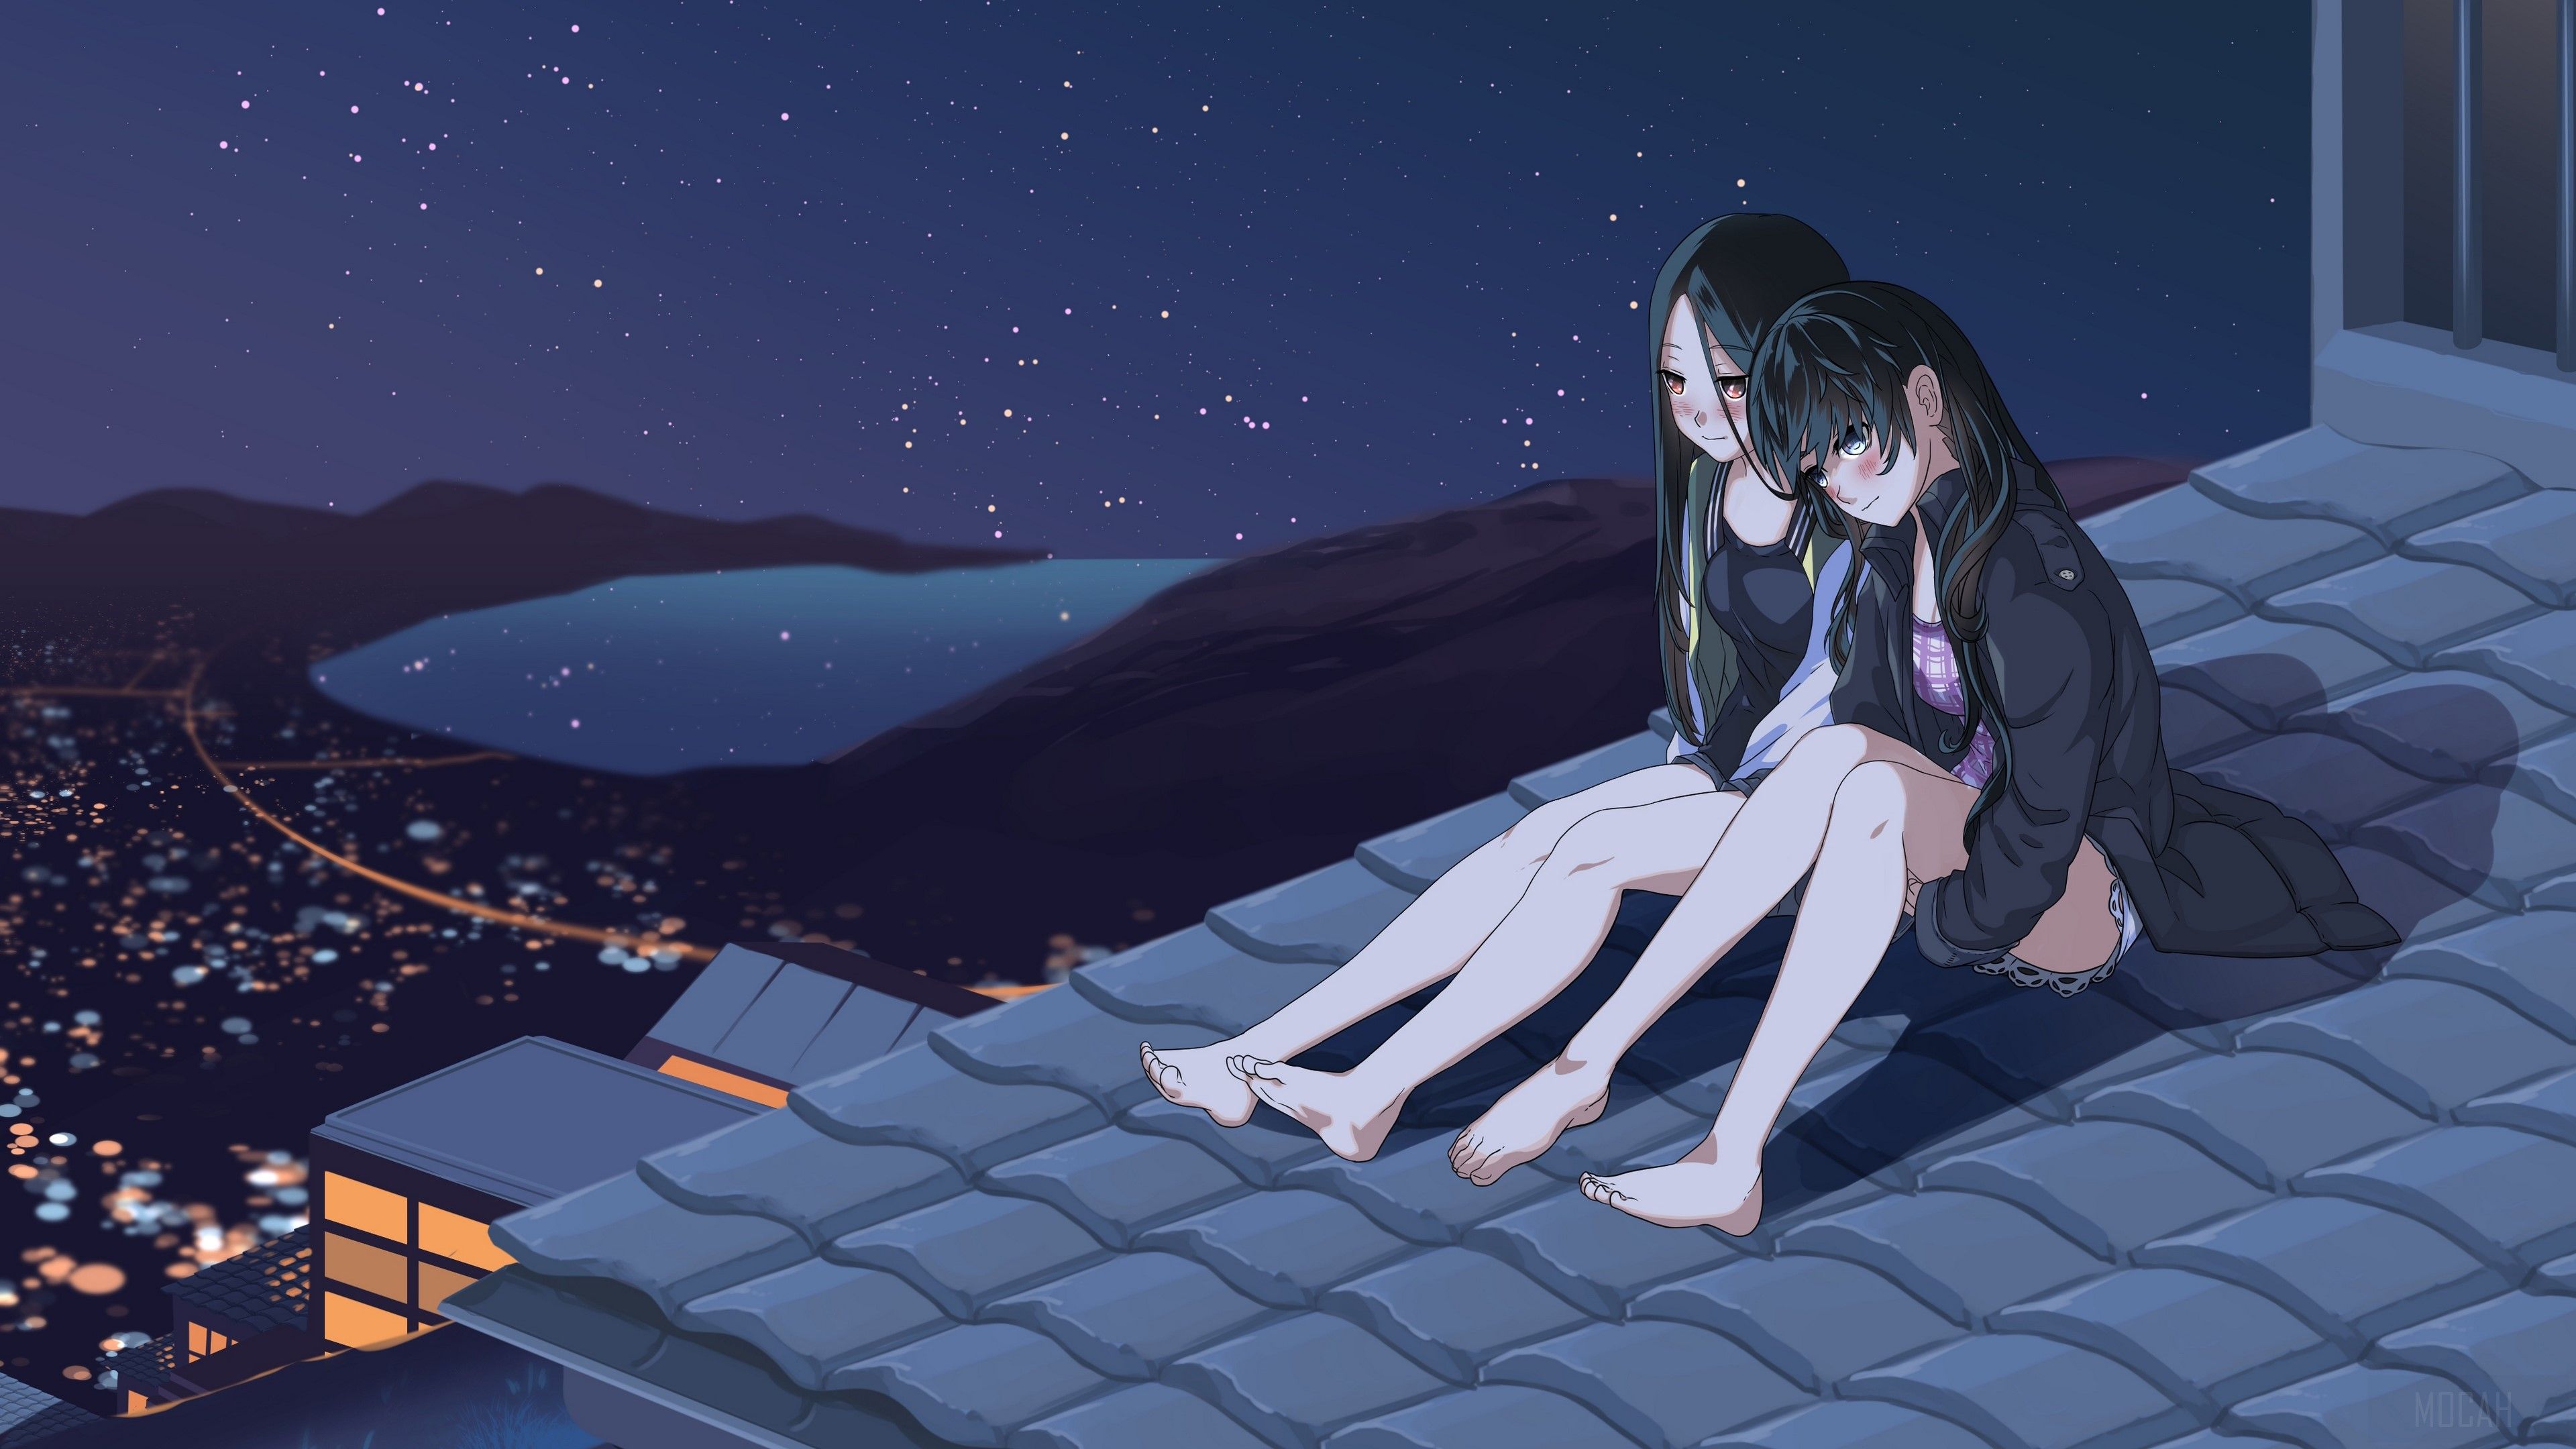 Two anime girls sitting on a rooftop at night. - Night